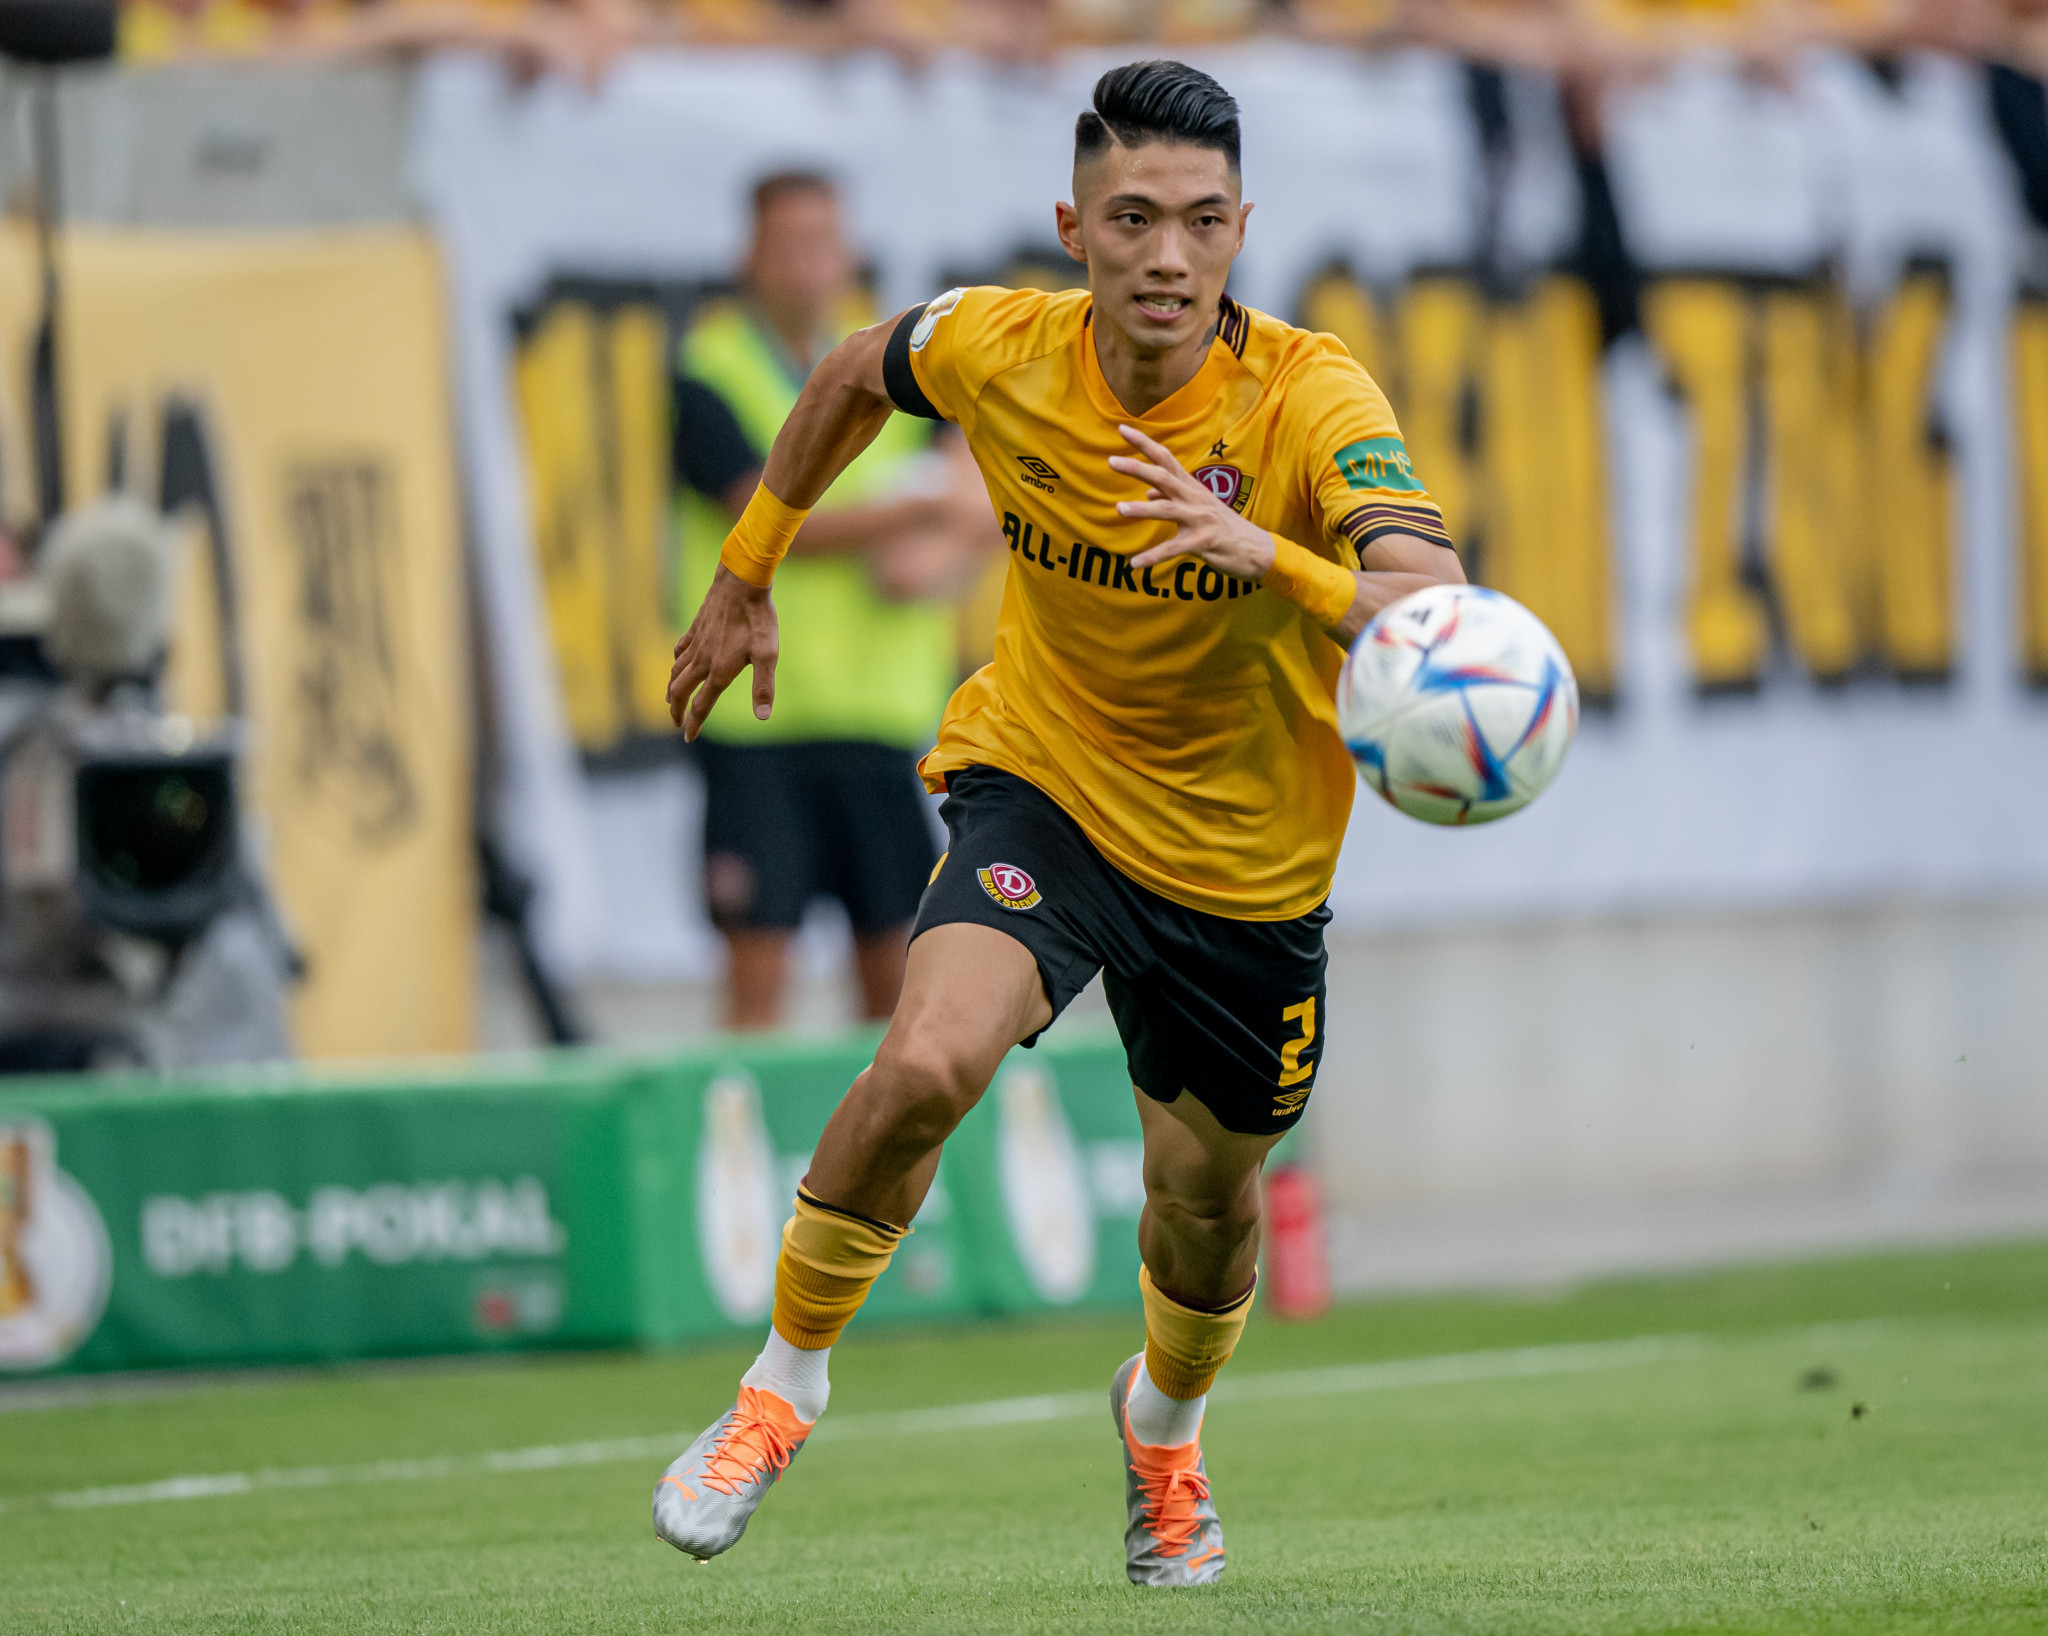 An agreement has been reached with Bundesliga club Dynamo Dresden for Park Kyu-hyun to represent South Korea at Hangzhou 2022 ©Getty Images